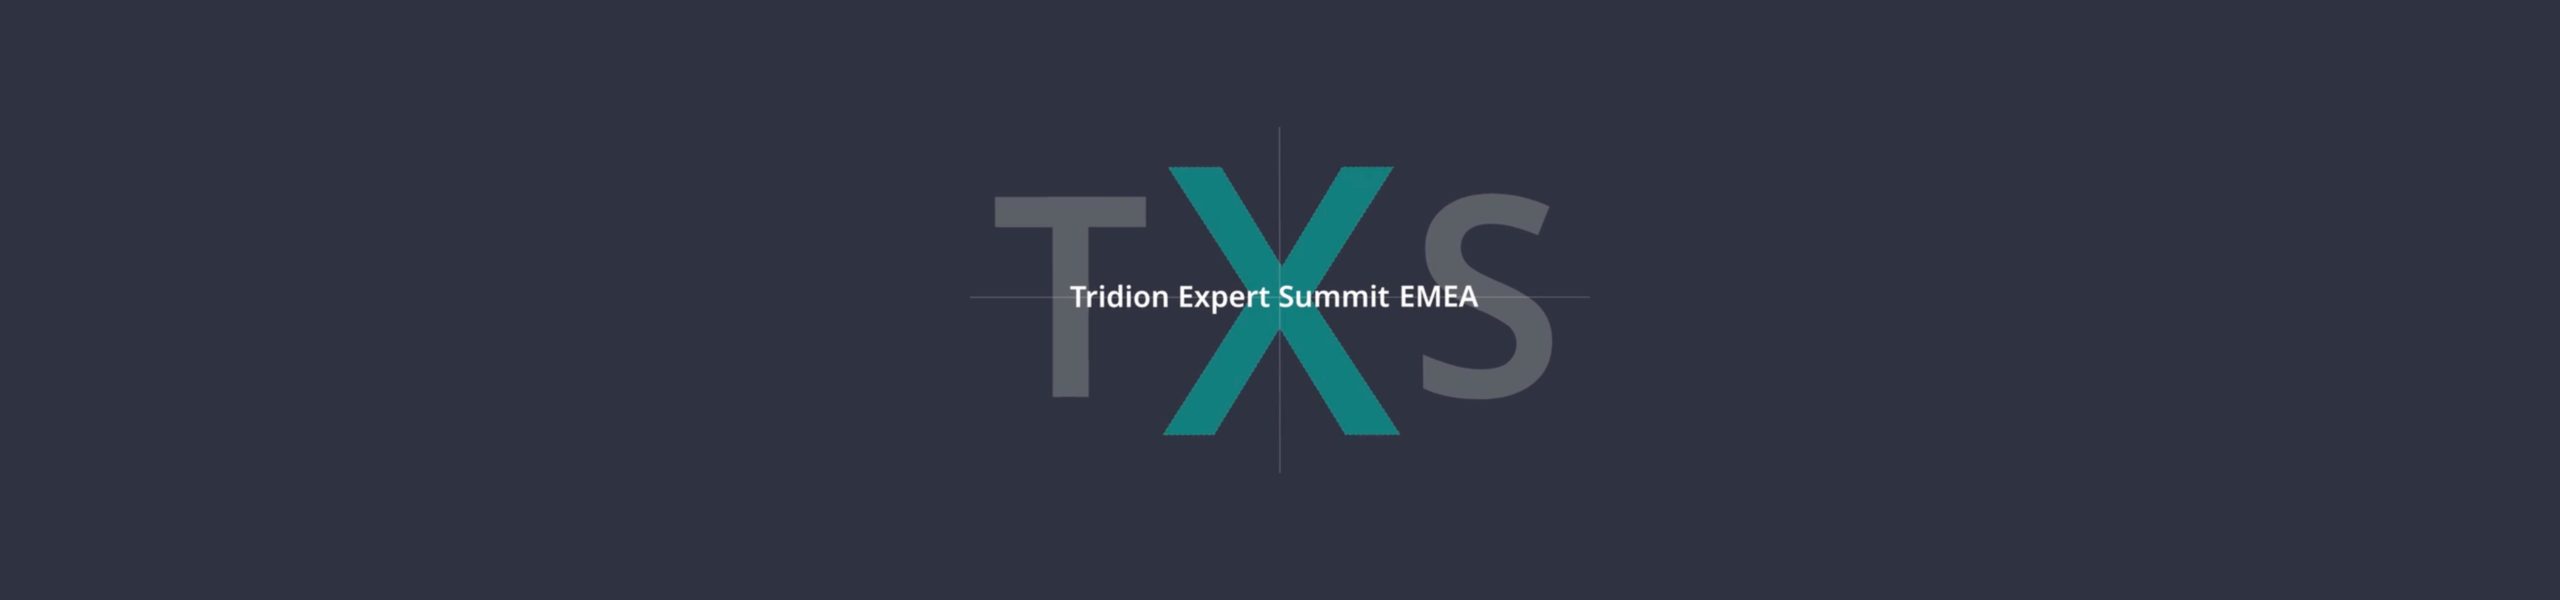 Content Bloom attended the Tridion 2019 developer summit in Amsterdam, presenting a recap of the event and everything you need to know.